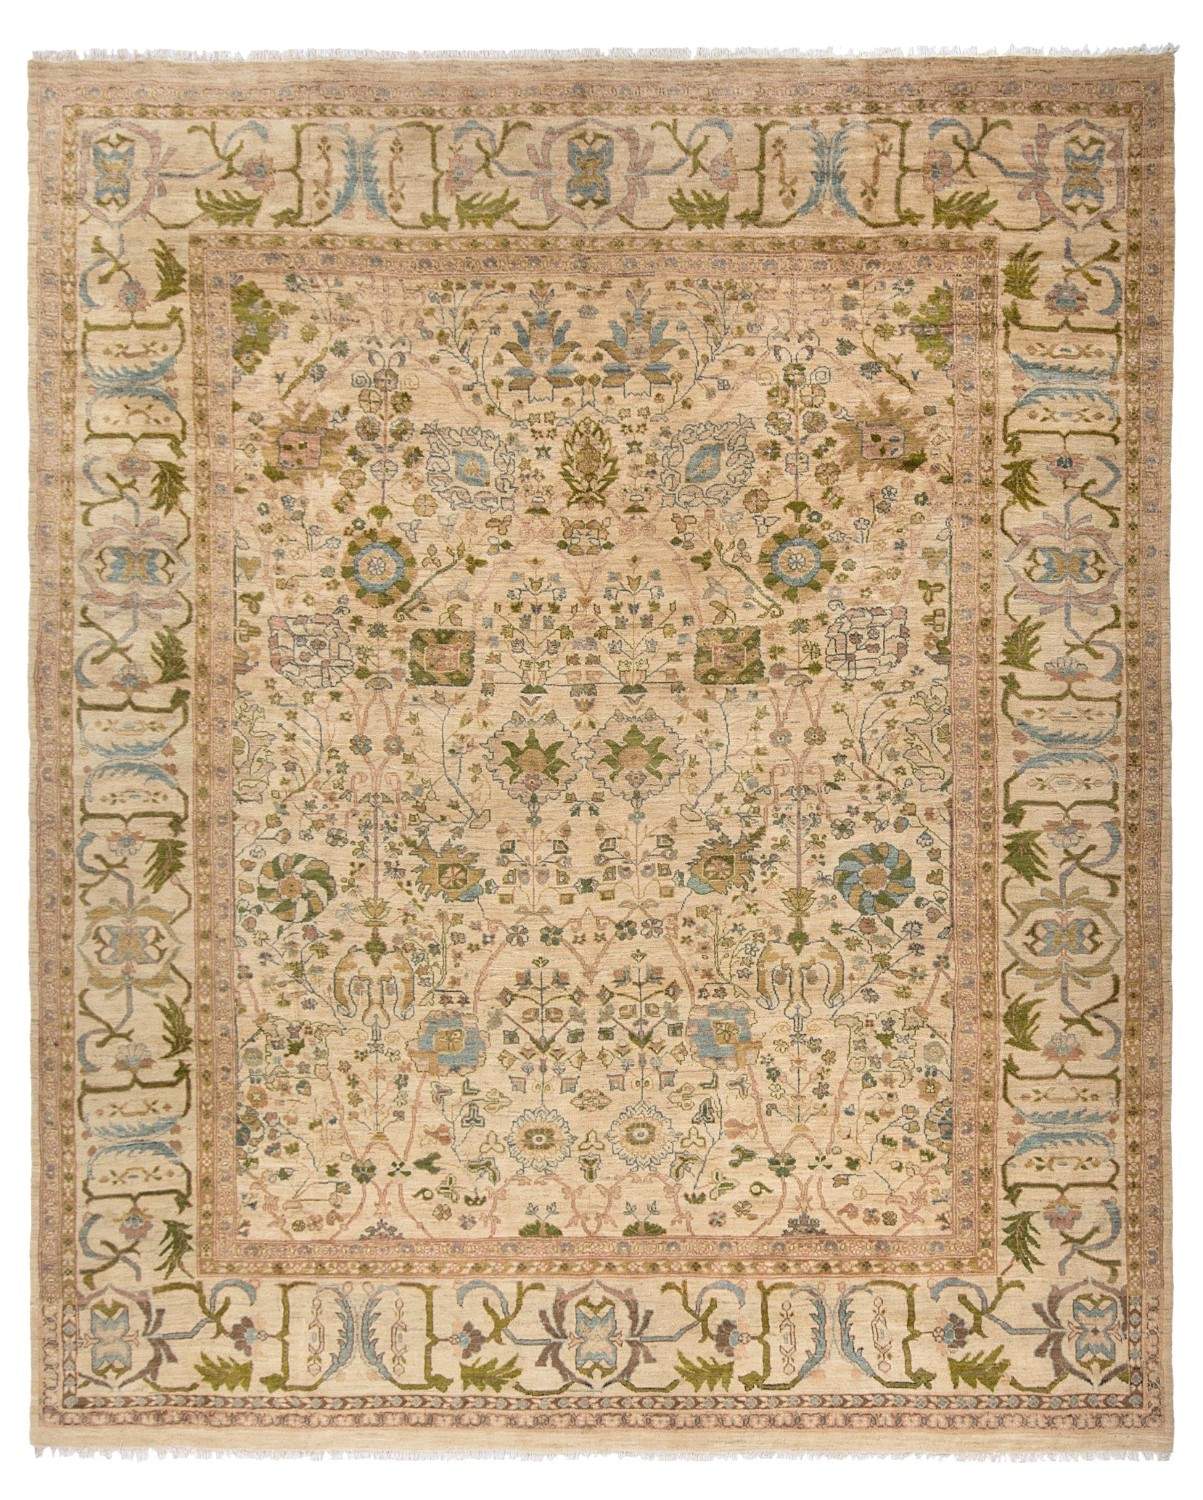 A Quick Buyer Guide to Selecting the Perfect Luxury Rug